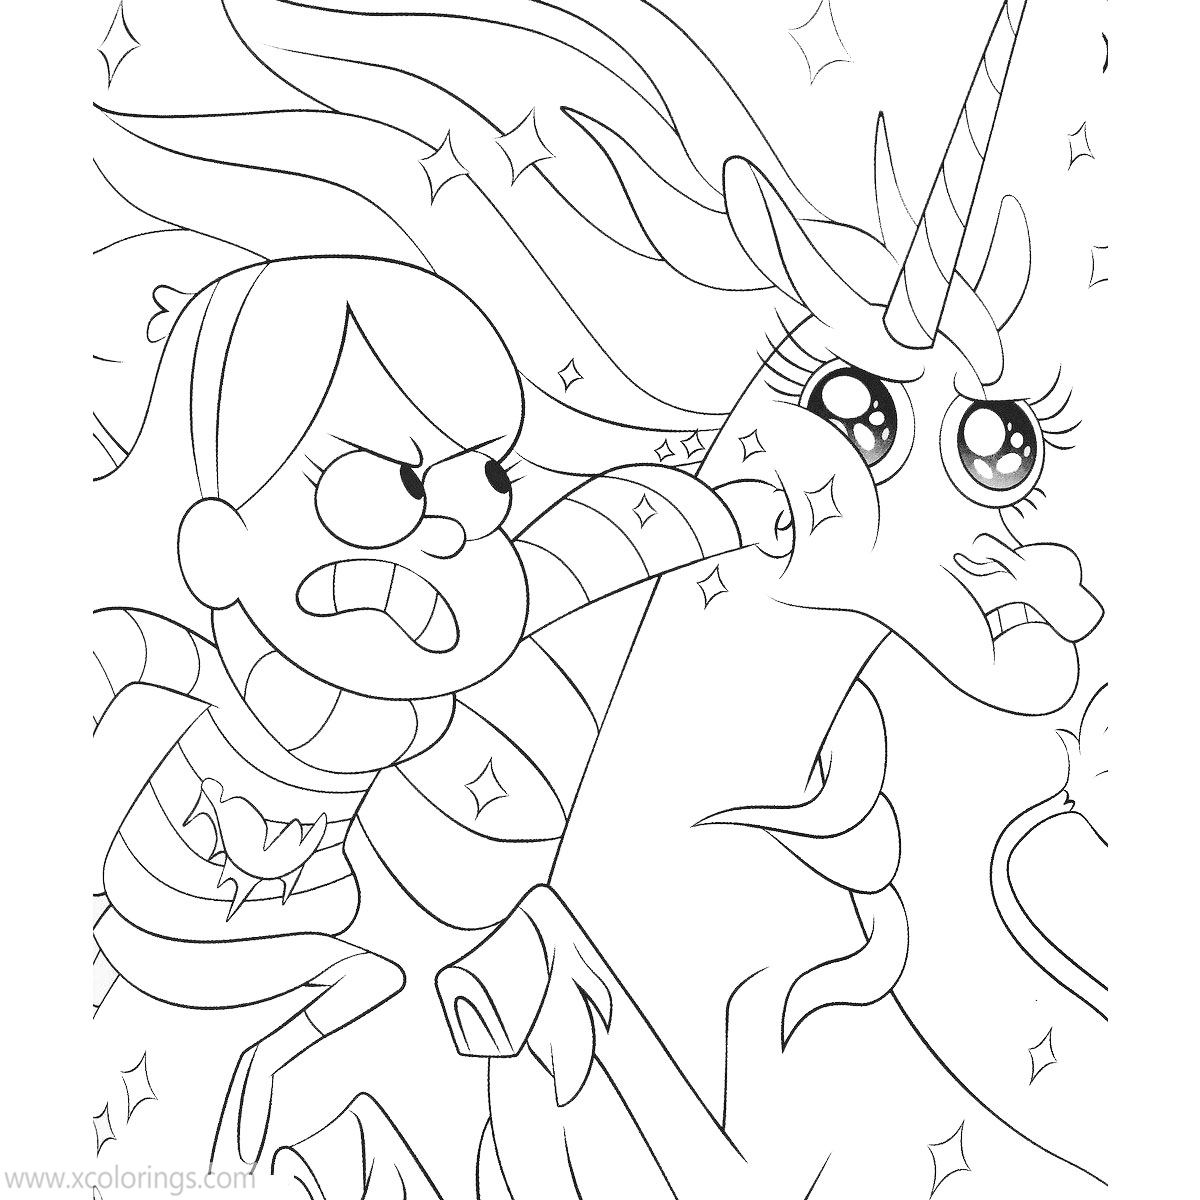 Free Gravity Falls Coloring Pages Mabel and Unicorn printable